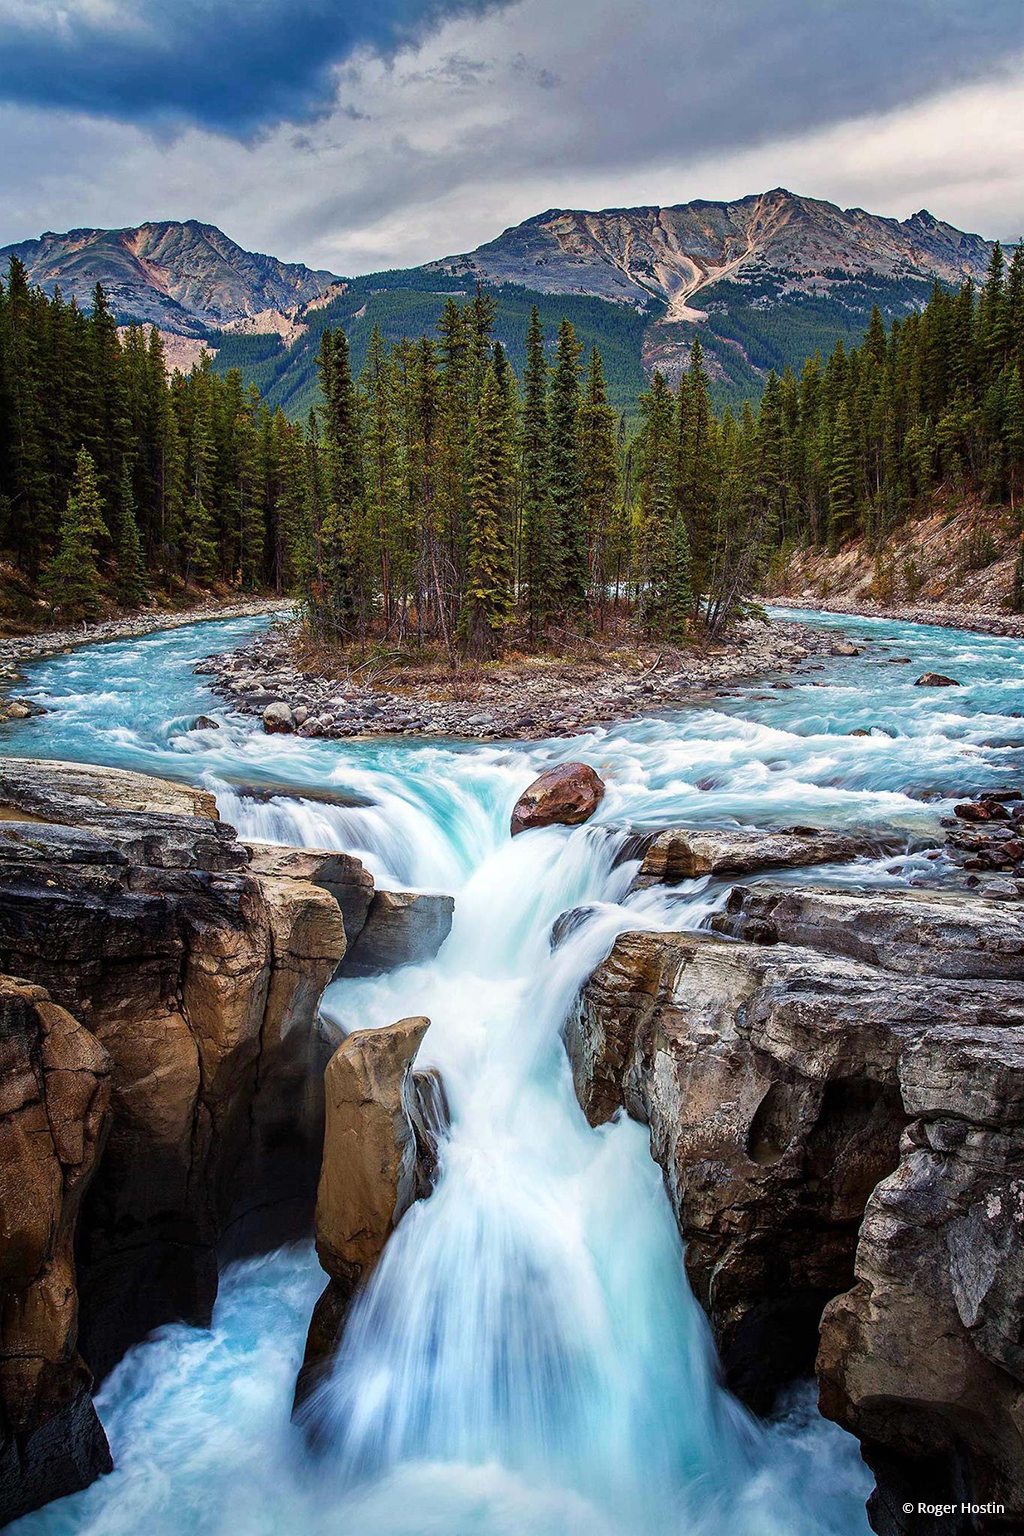 Today’s Photo Of The Day is “Sunwapta Falls” by Roger Hostin. Location: Jasper National Park, Alberta, Canada.